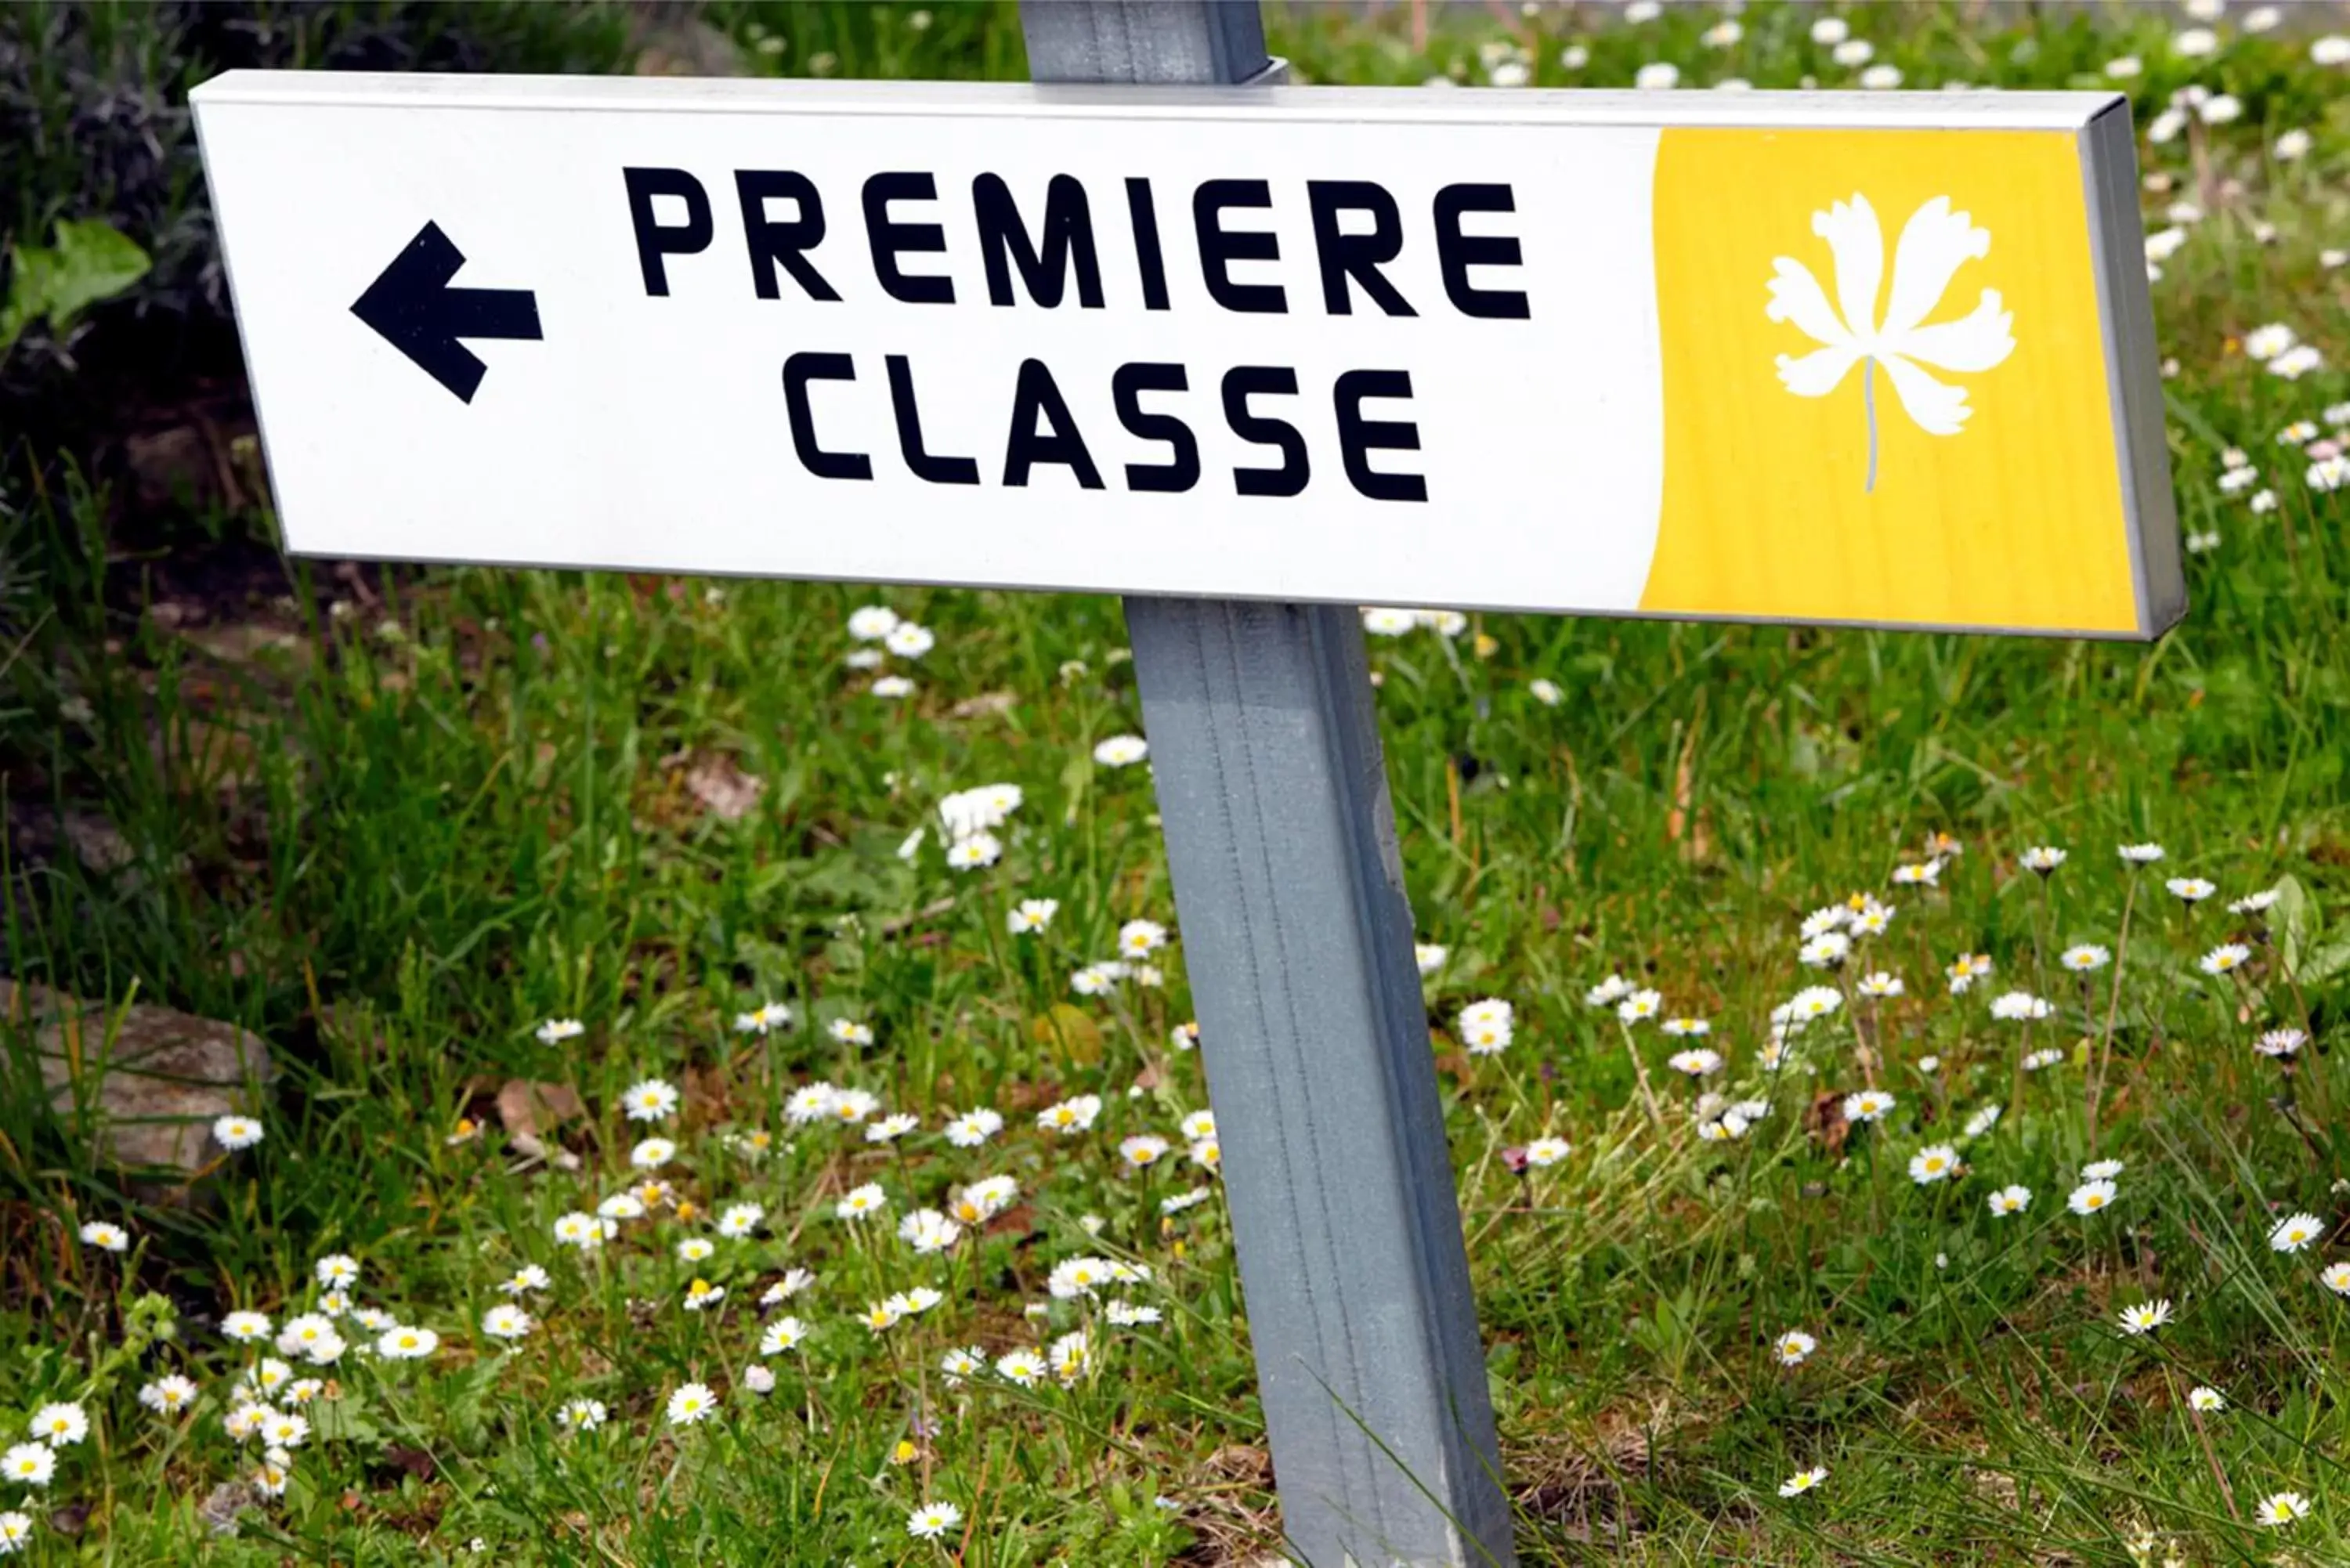 Property logo or sign in Premiere Classe Valenciennes Ouest Petite Foret